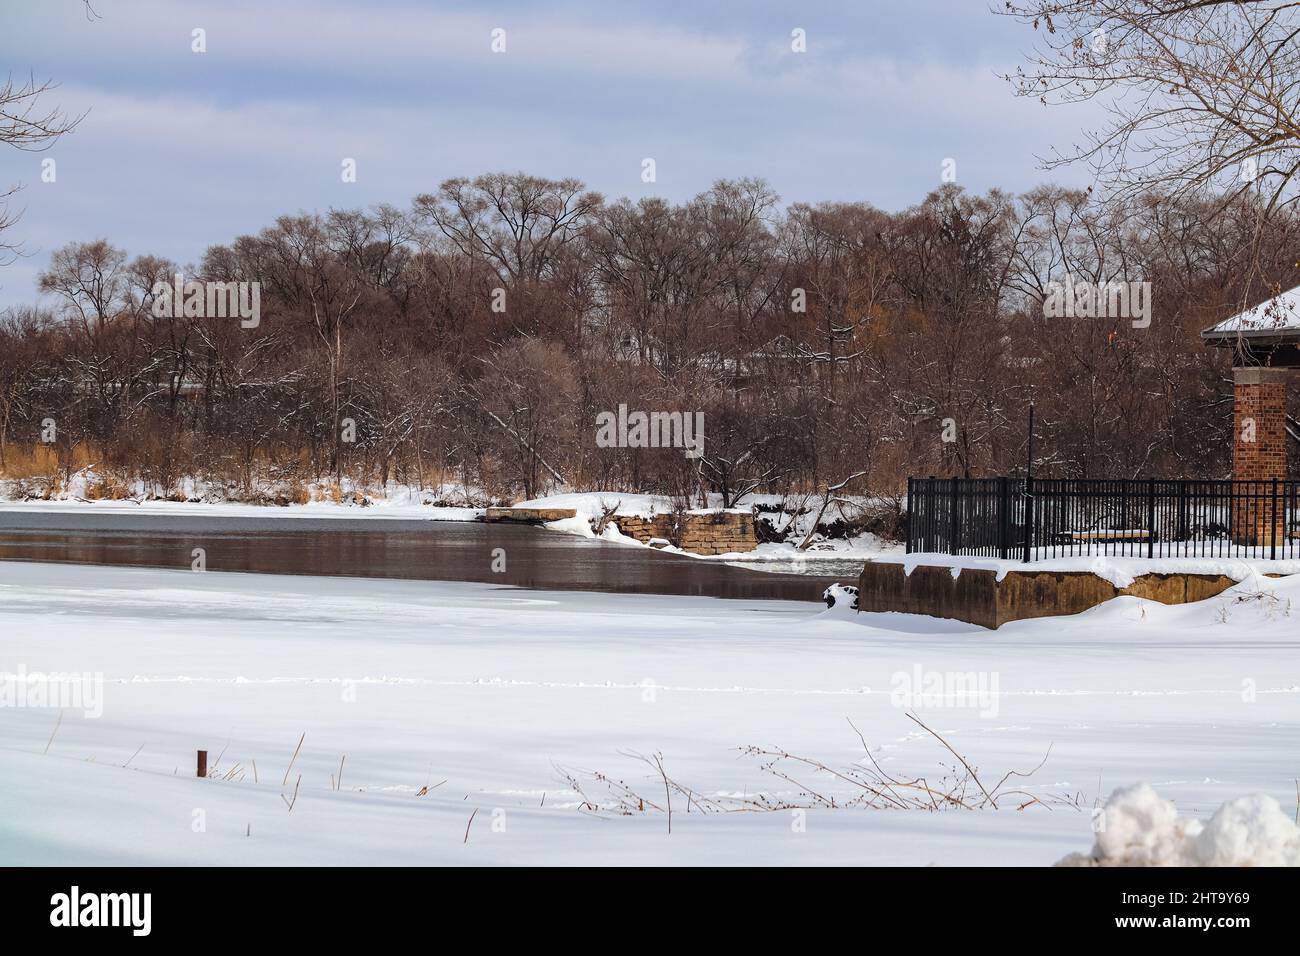 Snowy park on a clear winter day with trees on the background and a small shallow lake in the middle Stock Photo